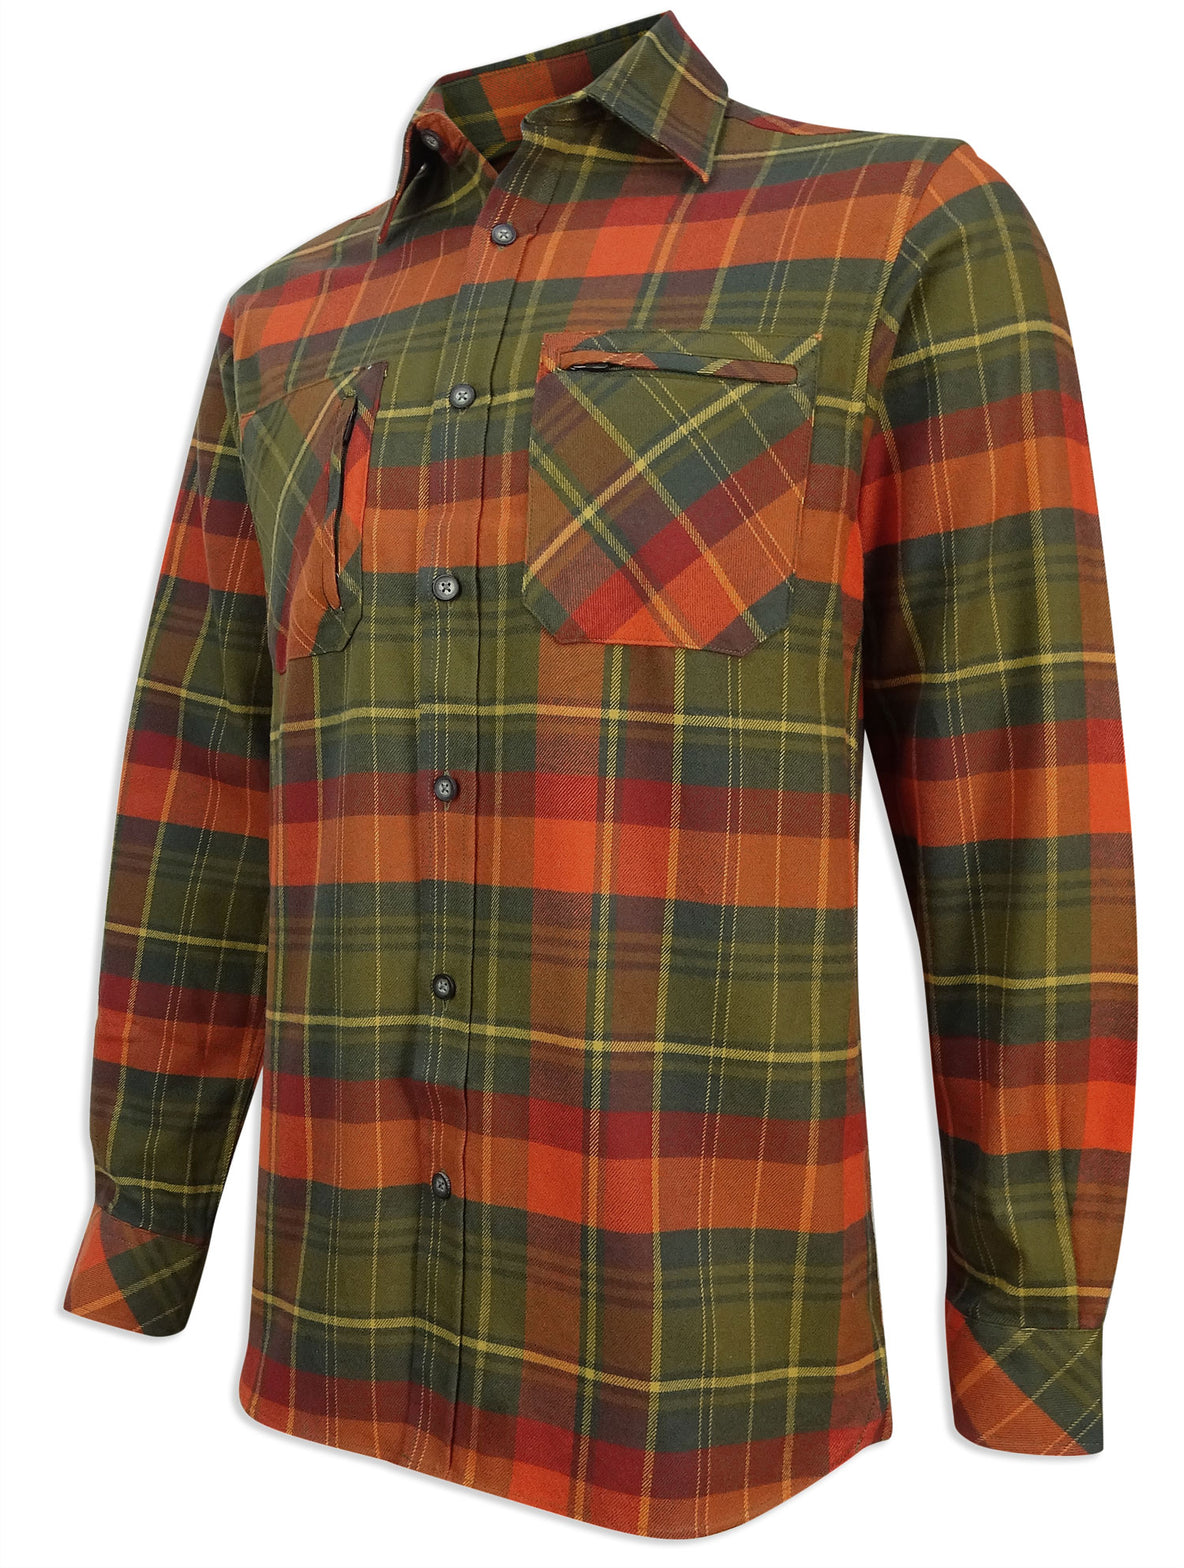 Autumn Hunting Shirt by Hoggs of Fife 